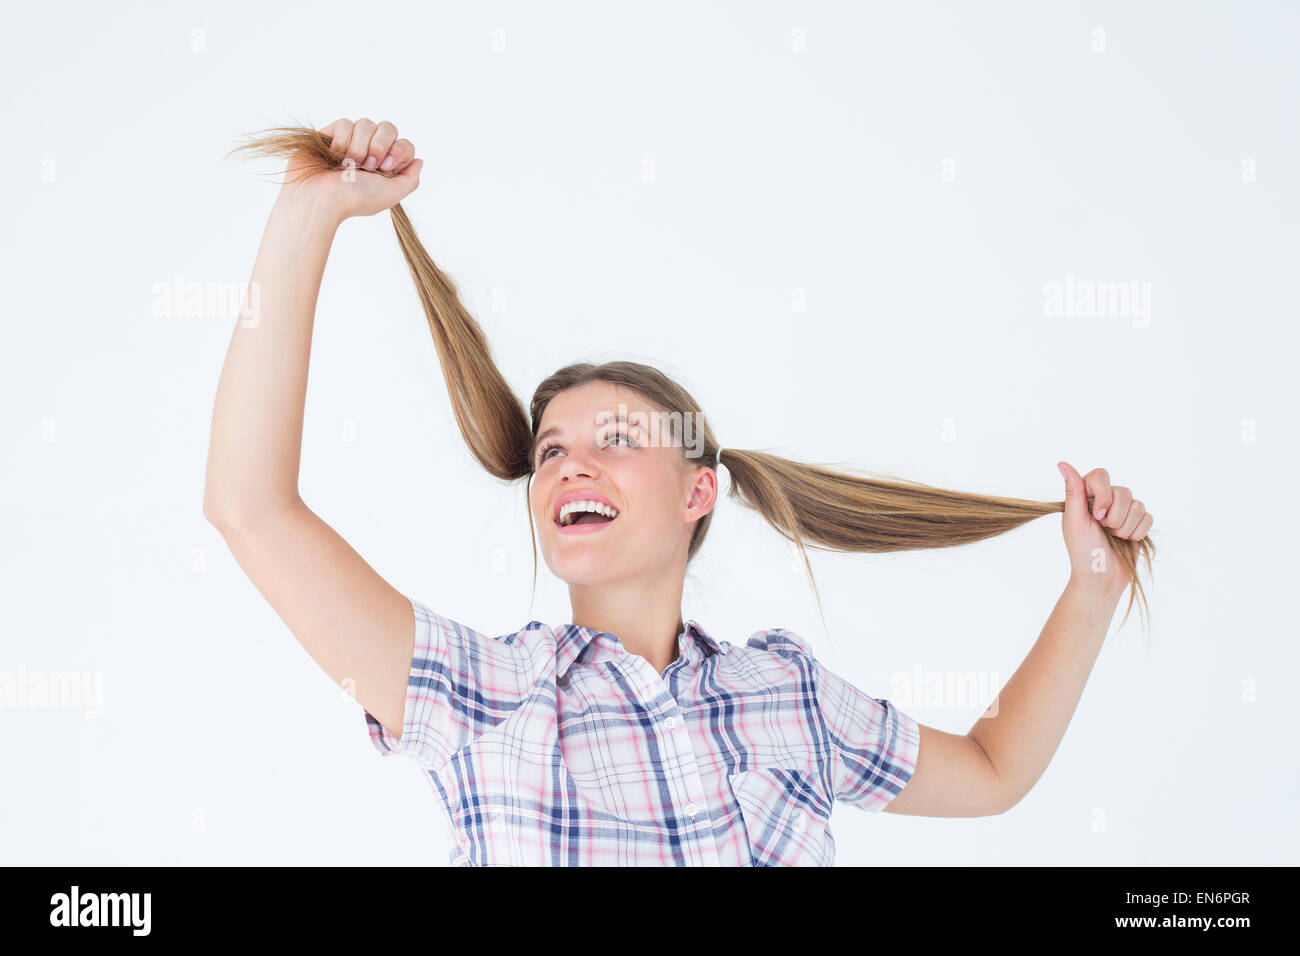 Geeky hipster holding her pigtails Stock Photo